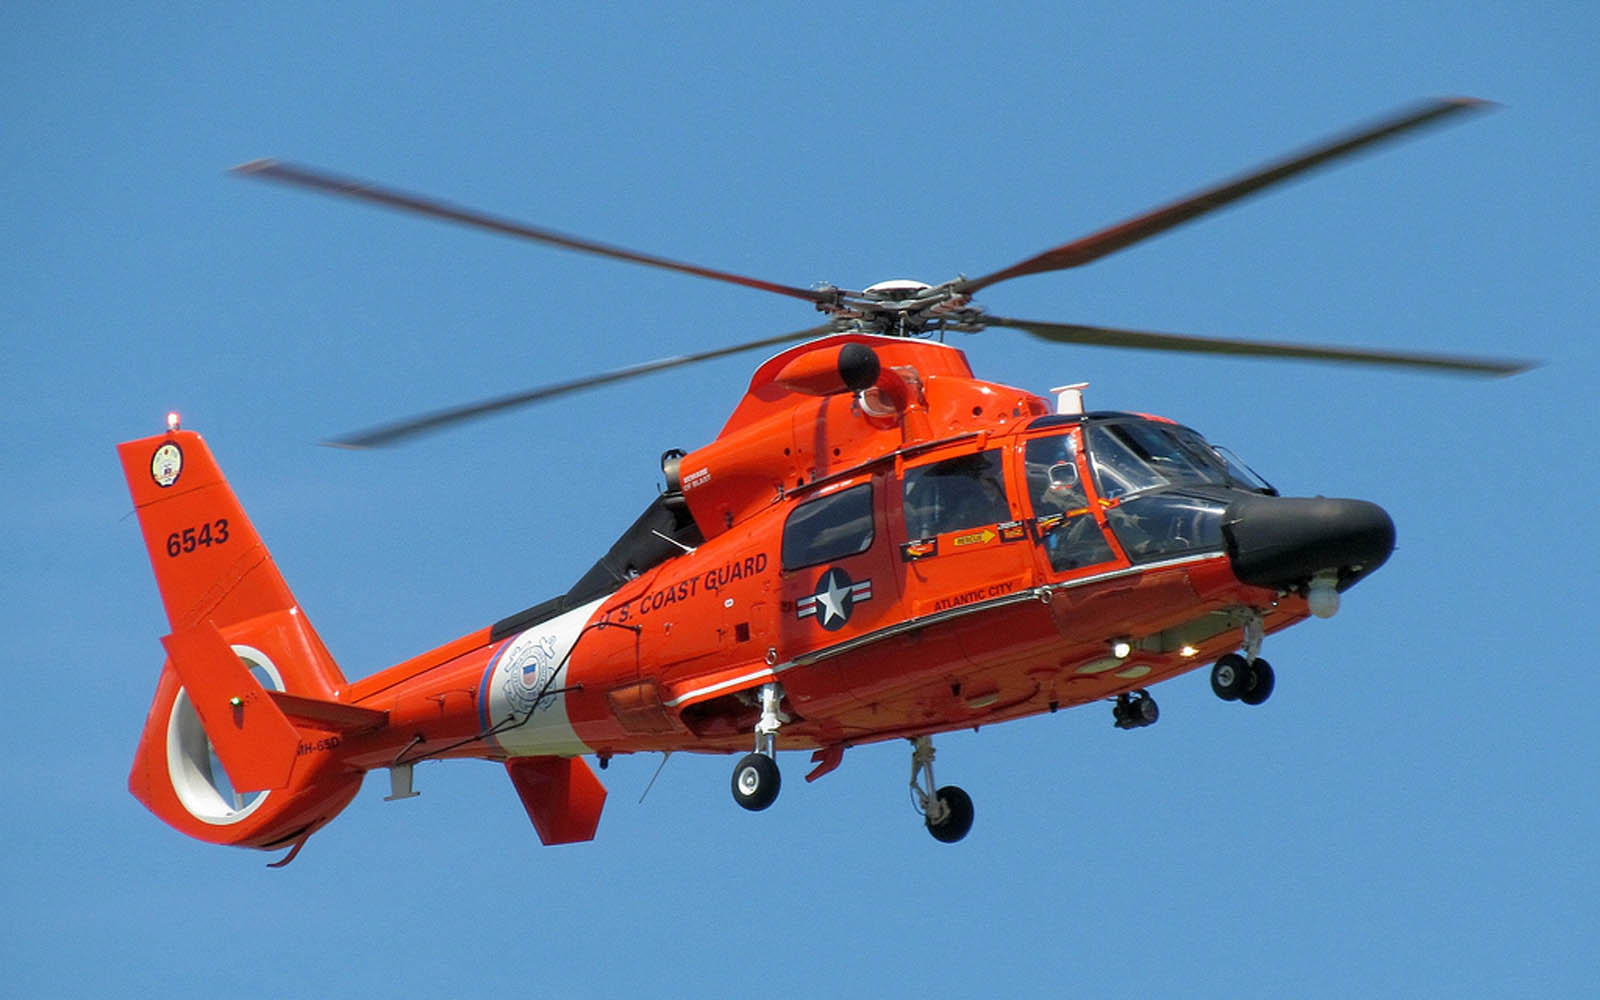 Coast Guard Helicopter Wallpaper Background Paos Image And Pictures